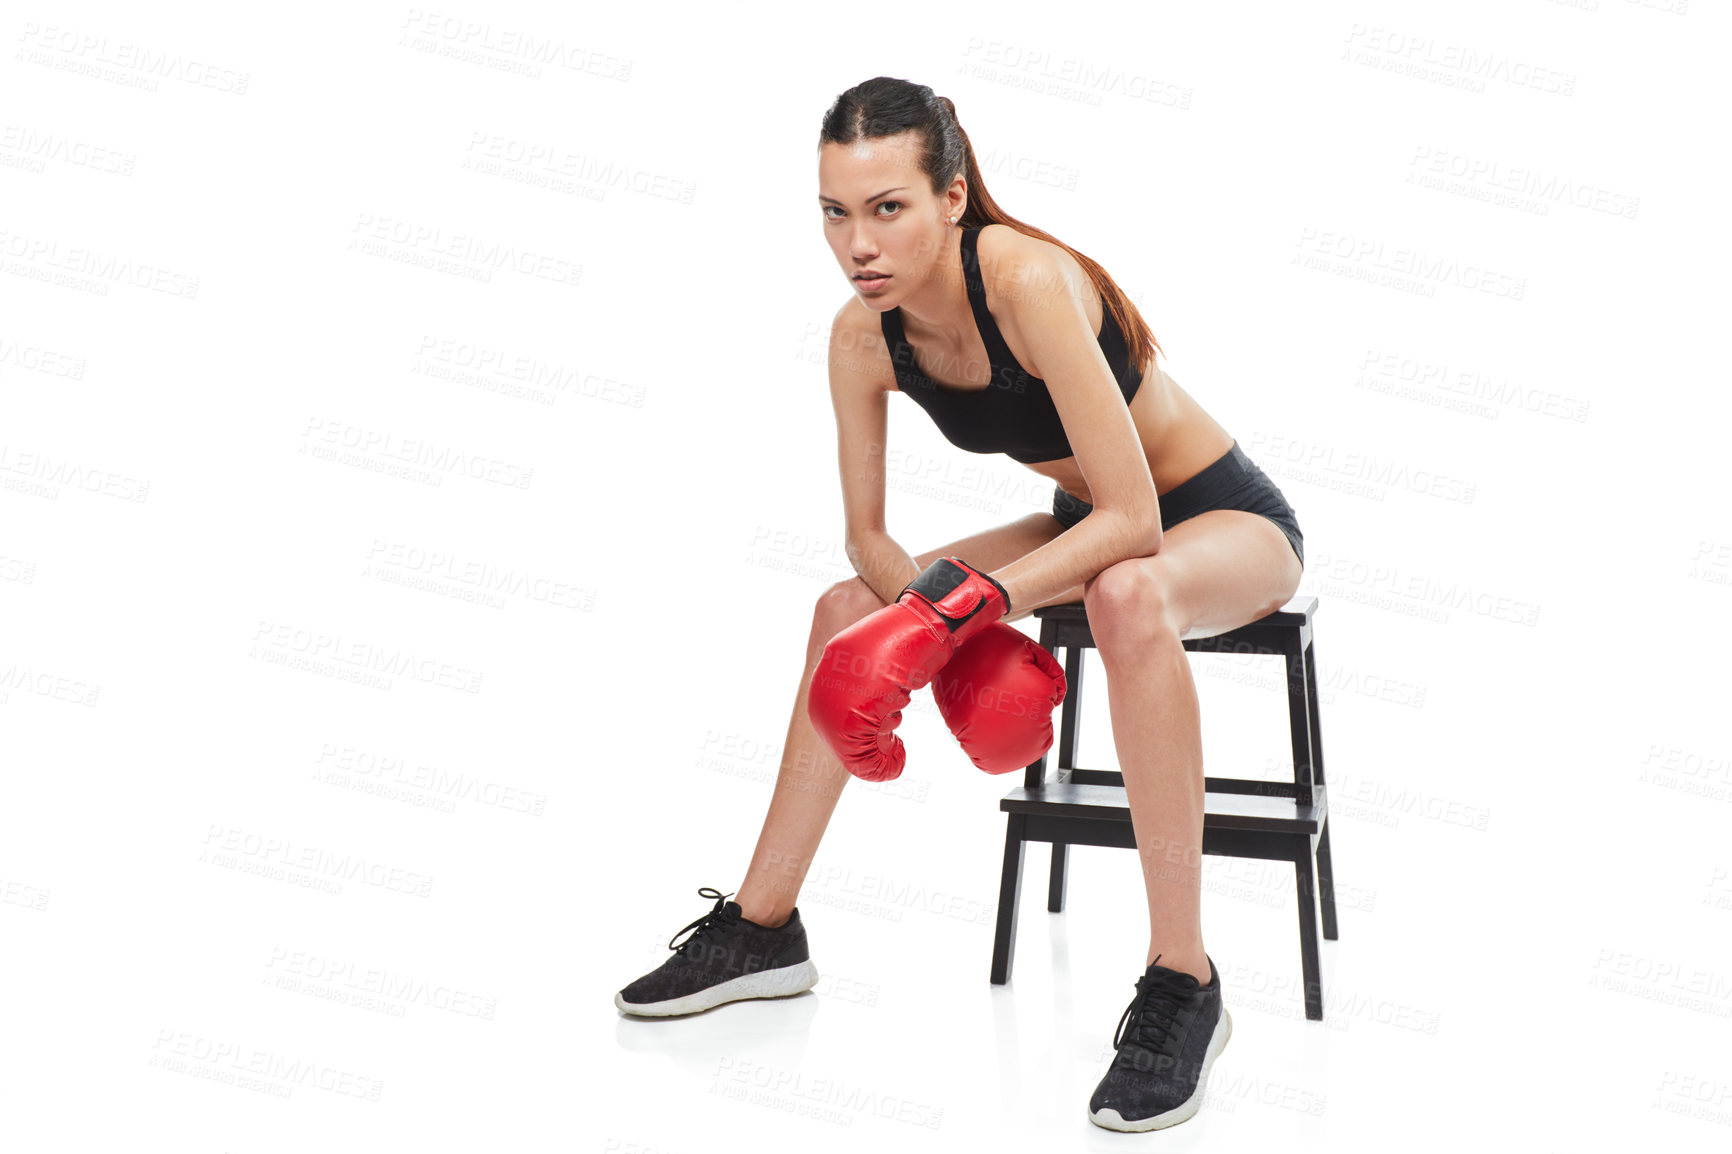 Buy stock photo Full length portrait of a young female boxer sitting on a stool during a match